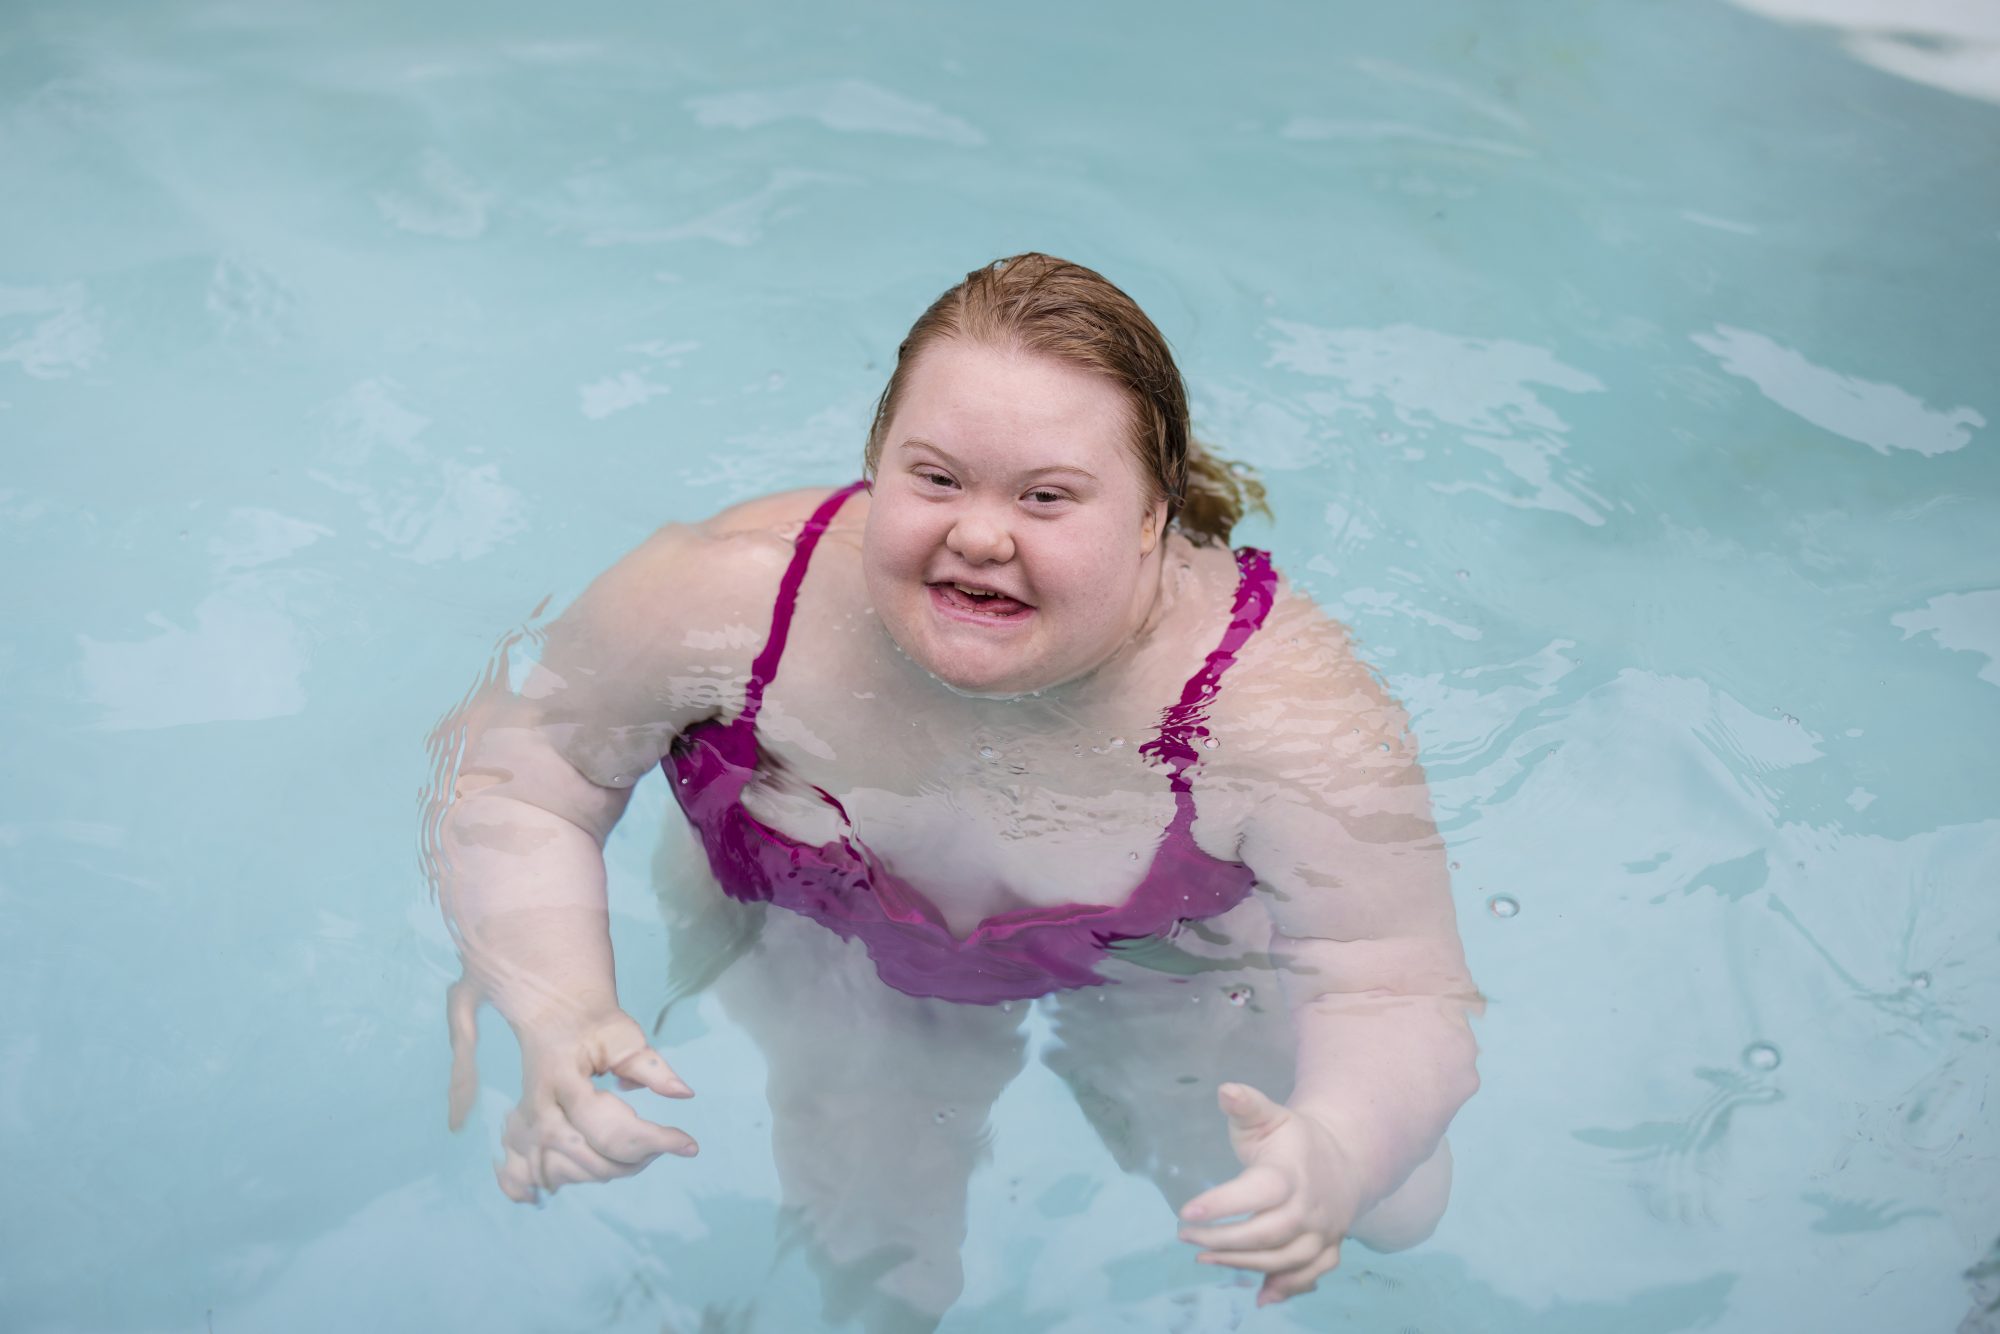 A girl with Down syndrome swimming in a pool